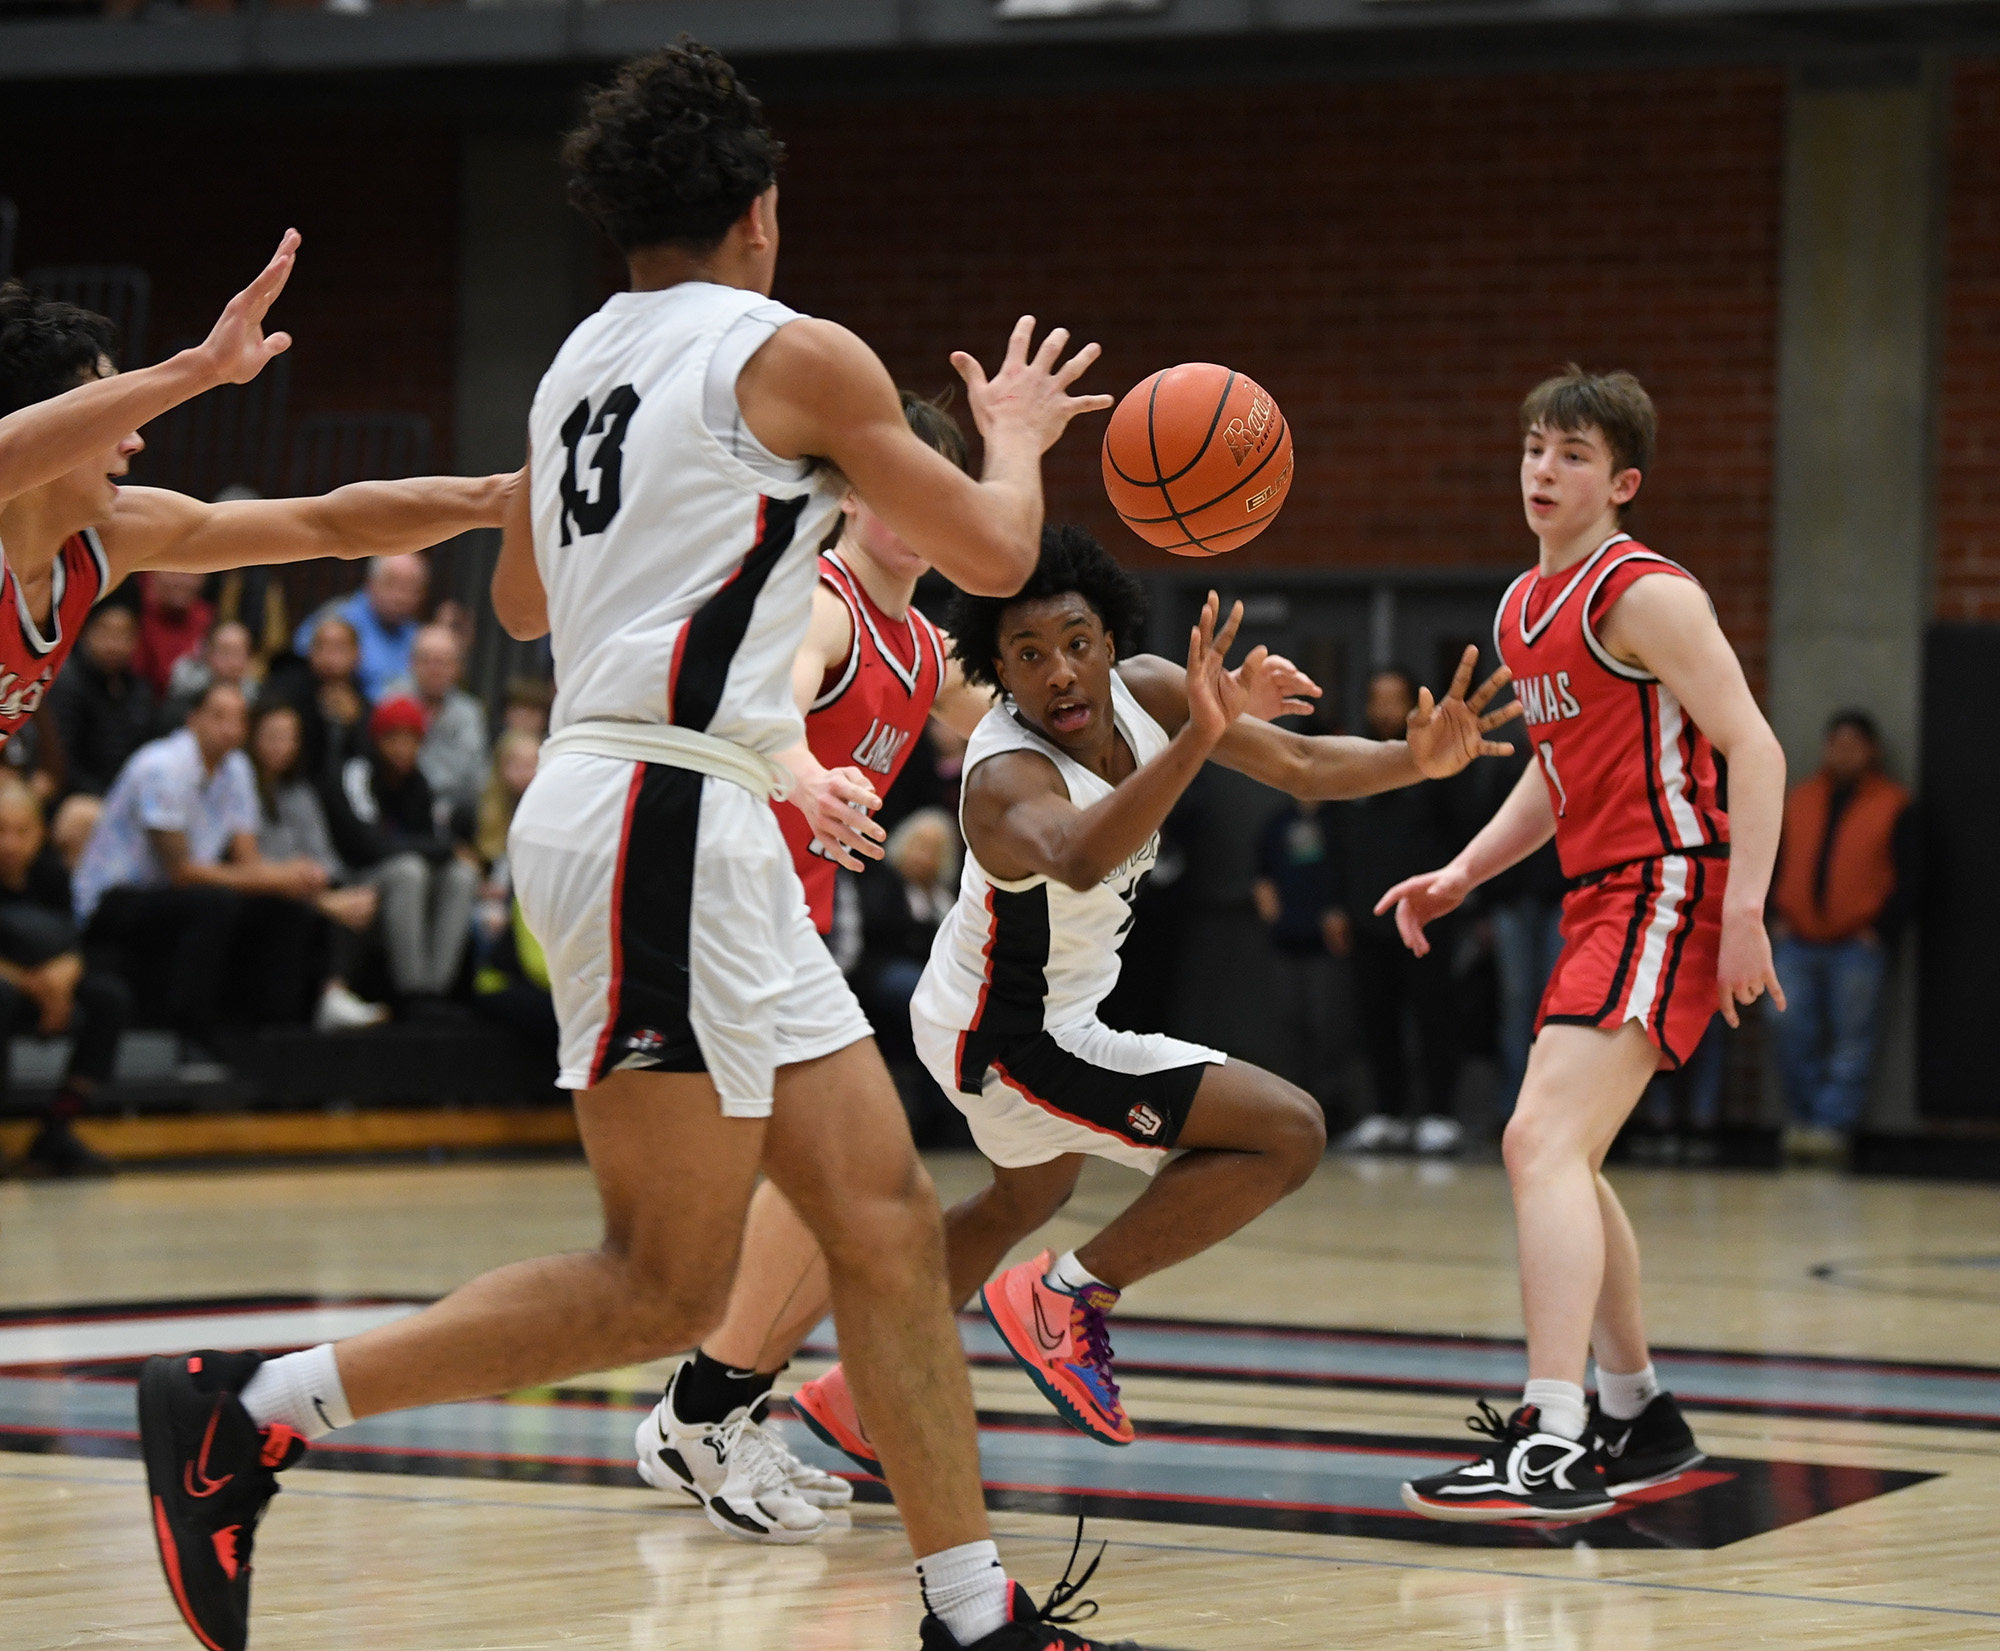 Union junior Nolan Frazier, center, passes the ball to Union senior Yanni Fassilis on Friday, Feb. 3, 2023, during the Titans’ 76-65 win against Camas at Union High School.